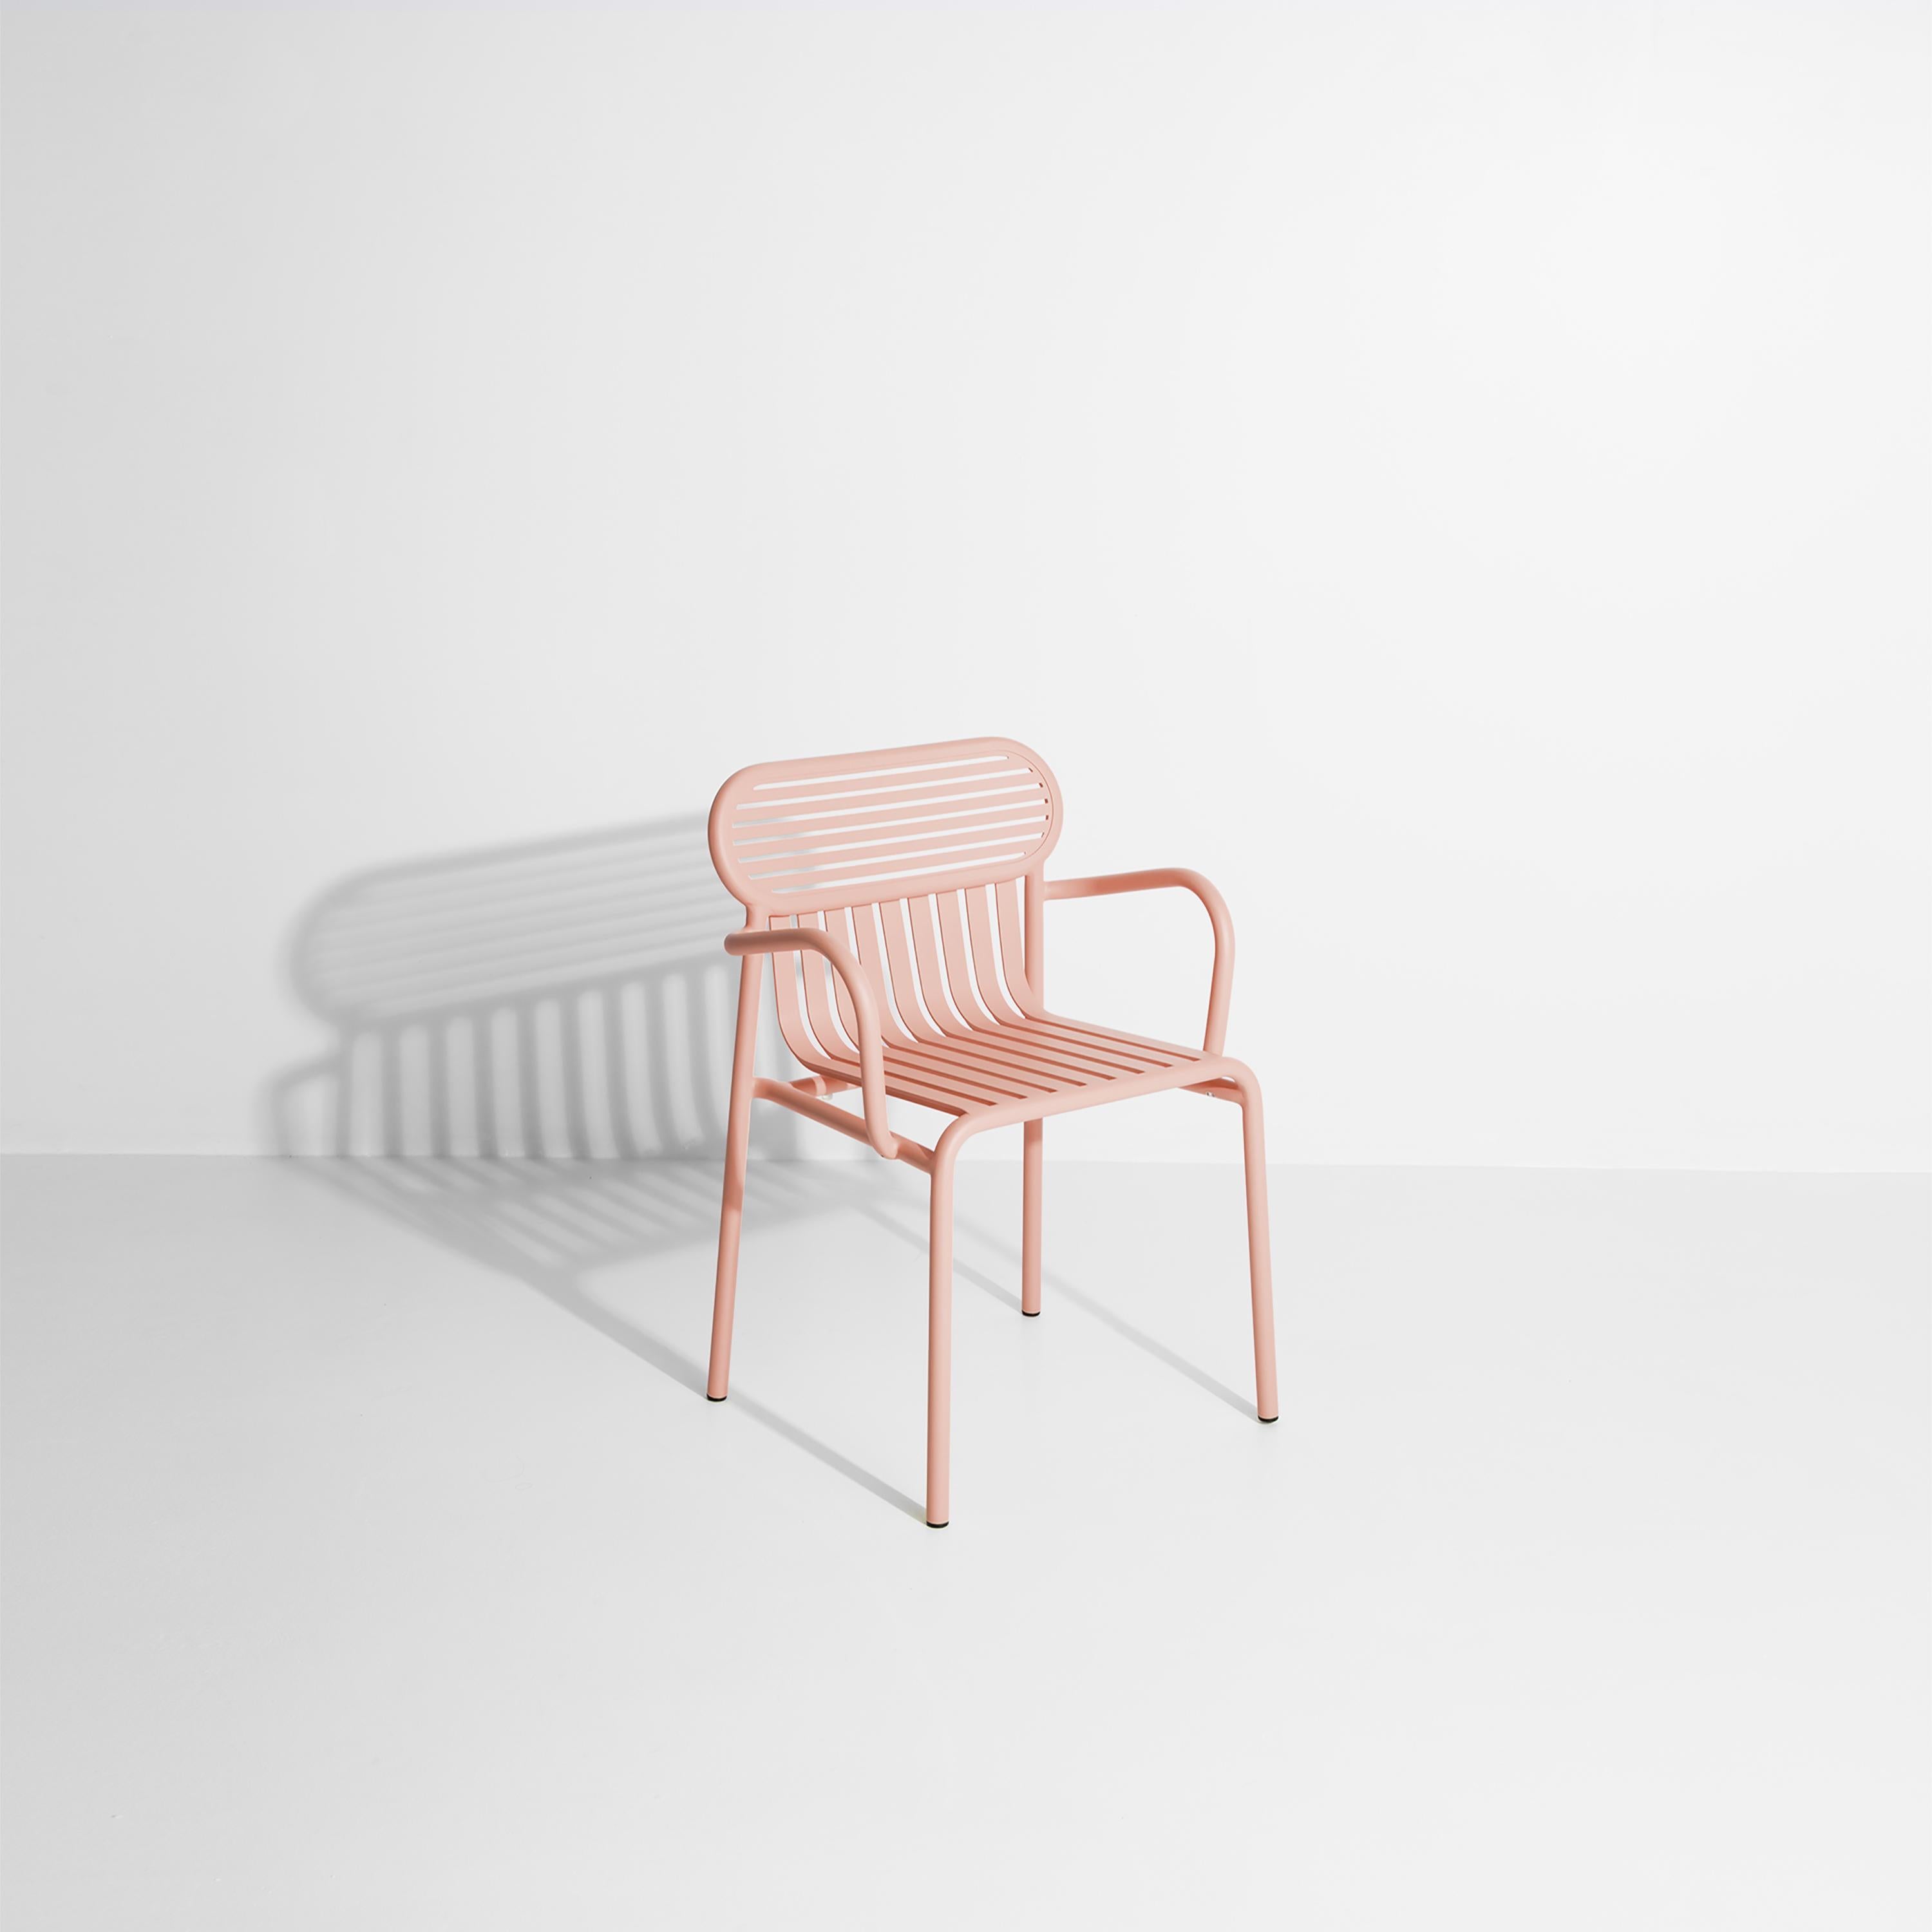 Petite Friture Week-End Bridge Chair in Blush Aluminium by Studio BrichetZiegler, 2017

The week-end collection is a full range of outdoor furniture, in aluminium grained epoxy paint, matt finish, that includes 18 functions and 8 colours for the